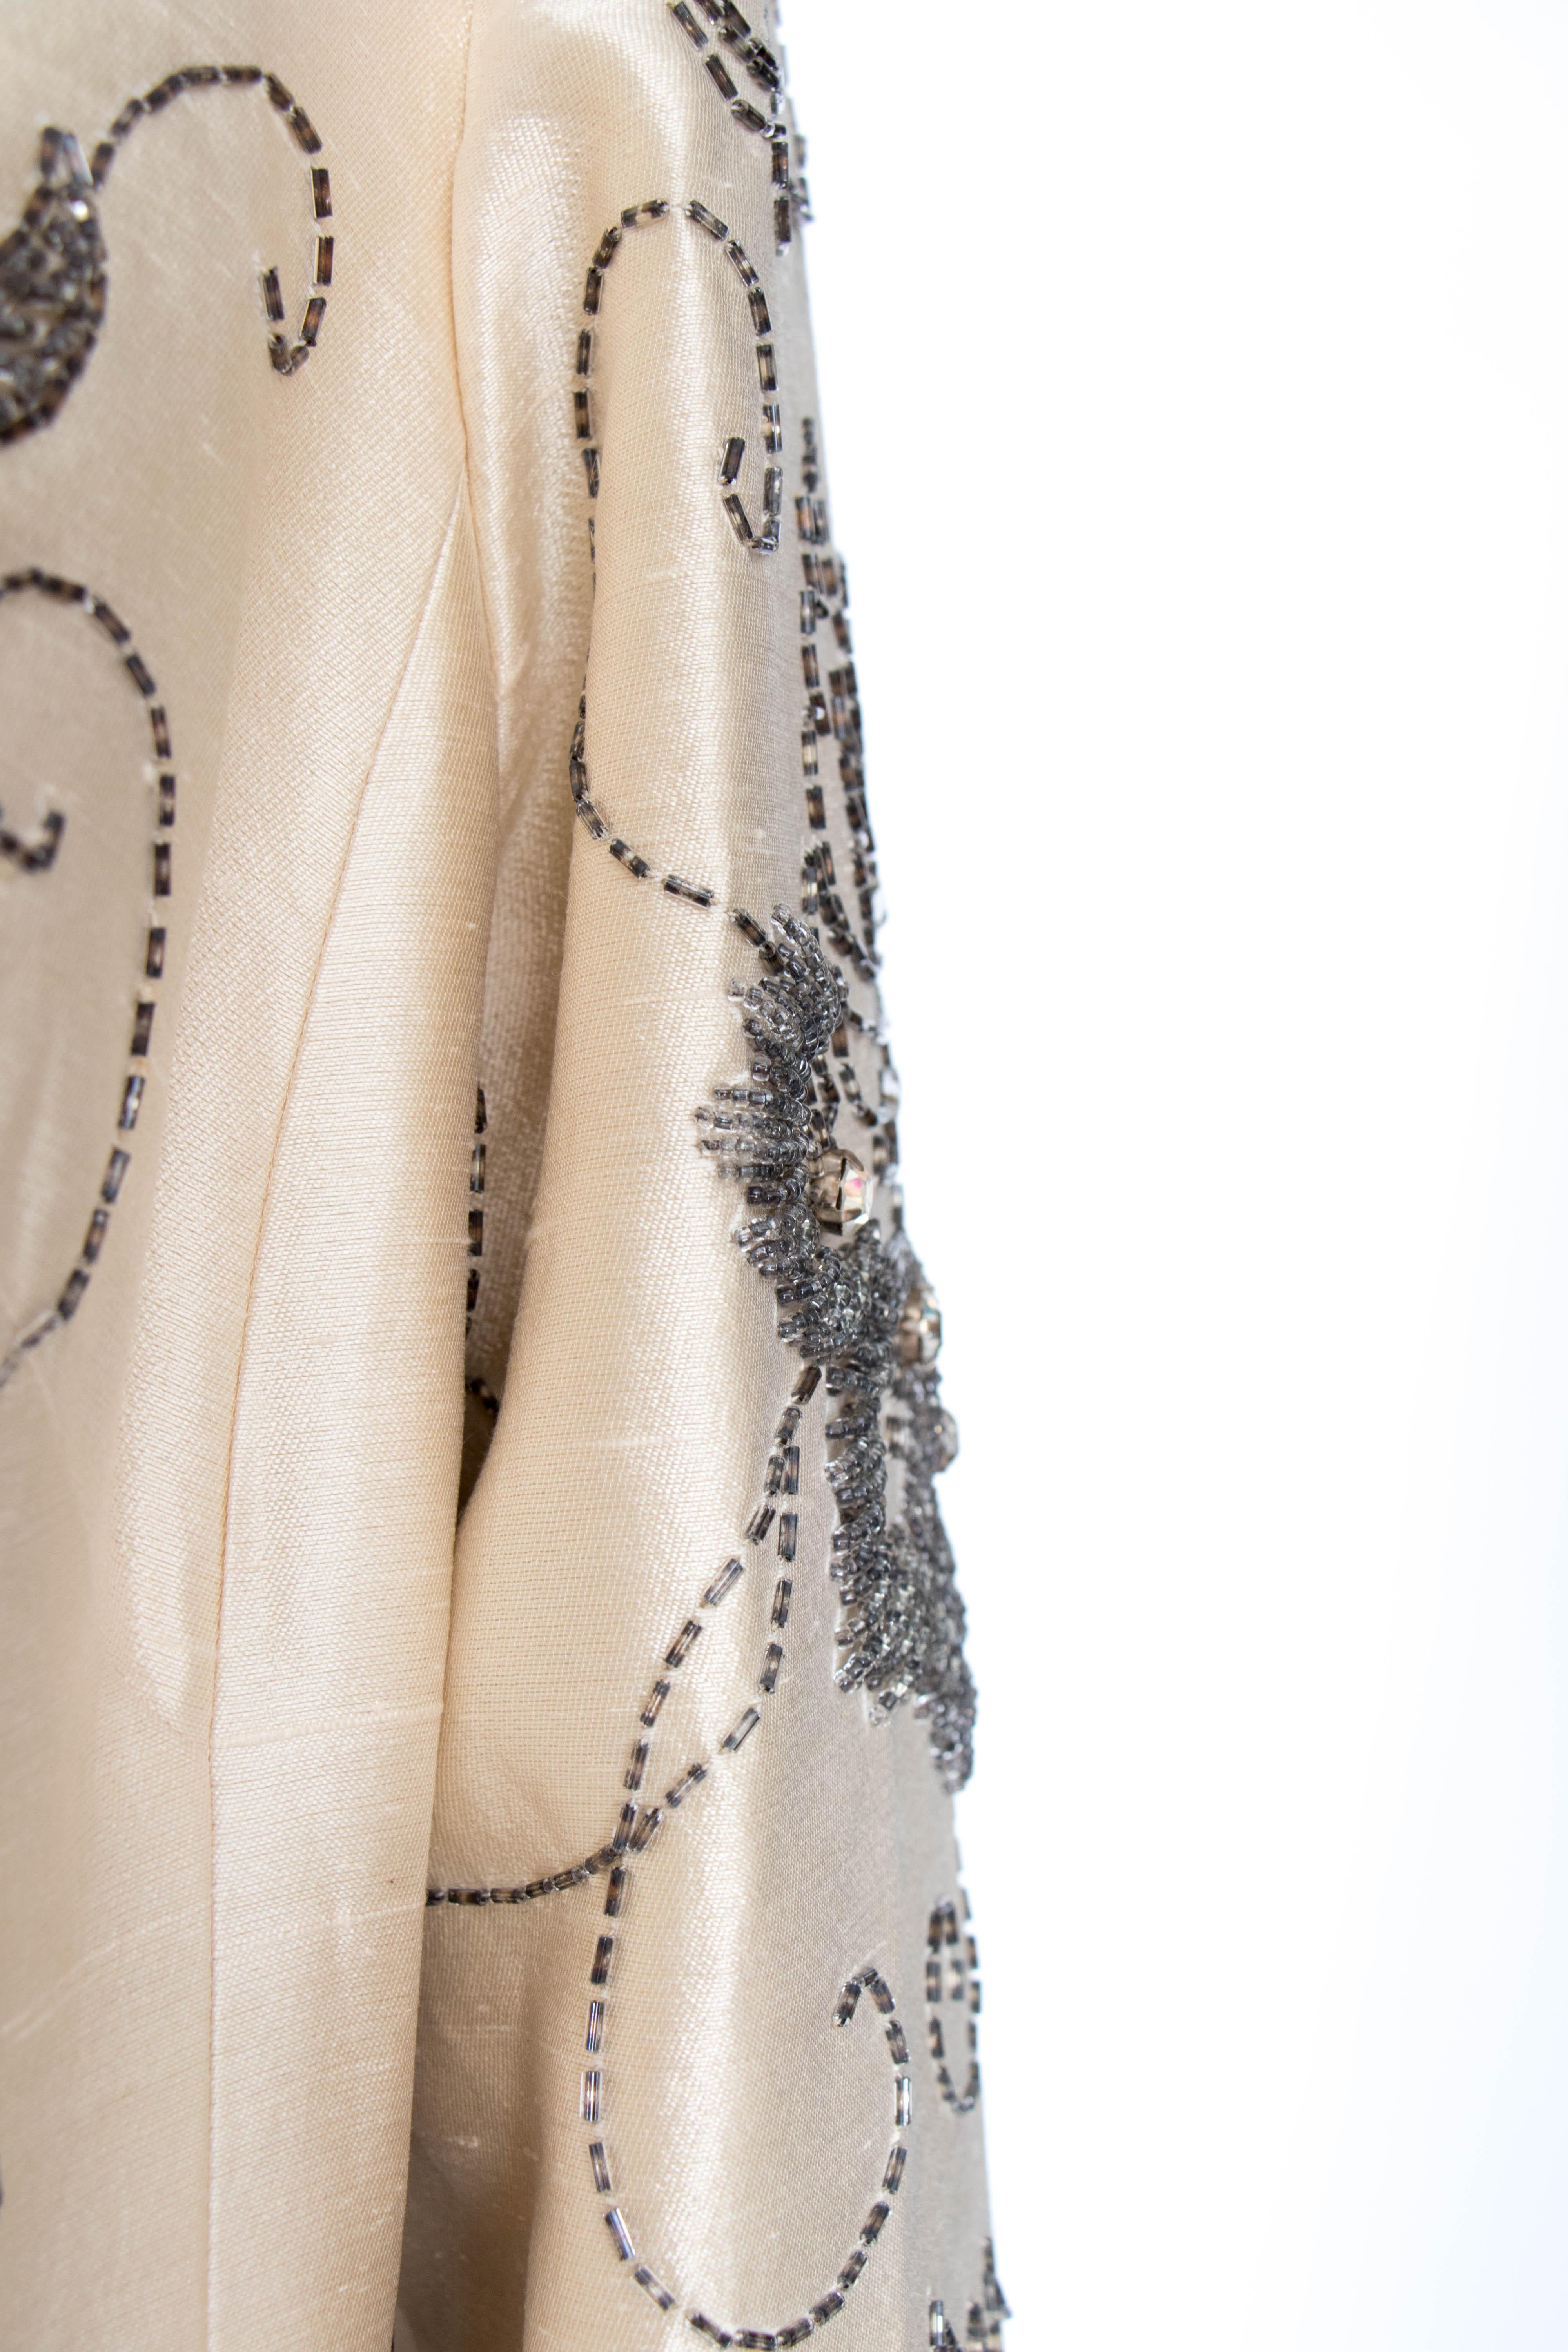 An incredible 1960s couture silk jacket with a round collar and a hidden front button closure. Intricate beading with silver beads and clear rhinestones are set in a floral pattern across the coat. The coat is fully lined.  

